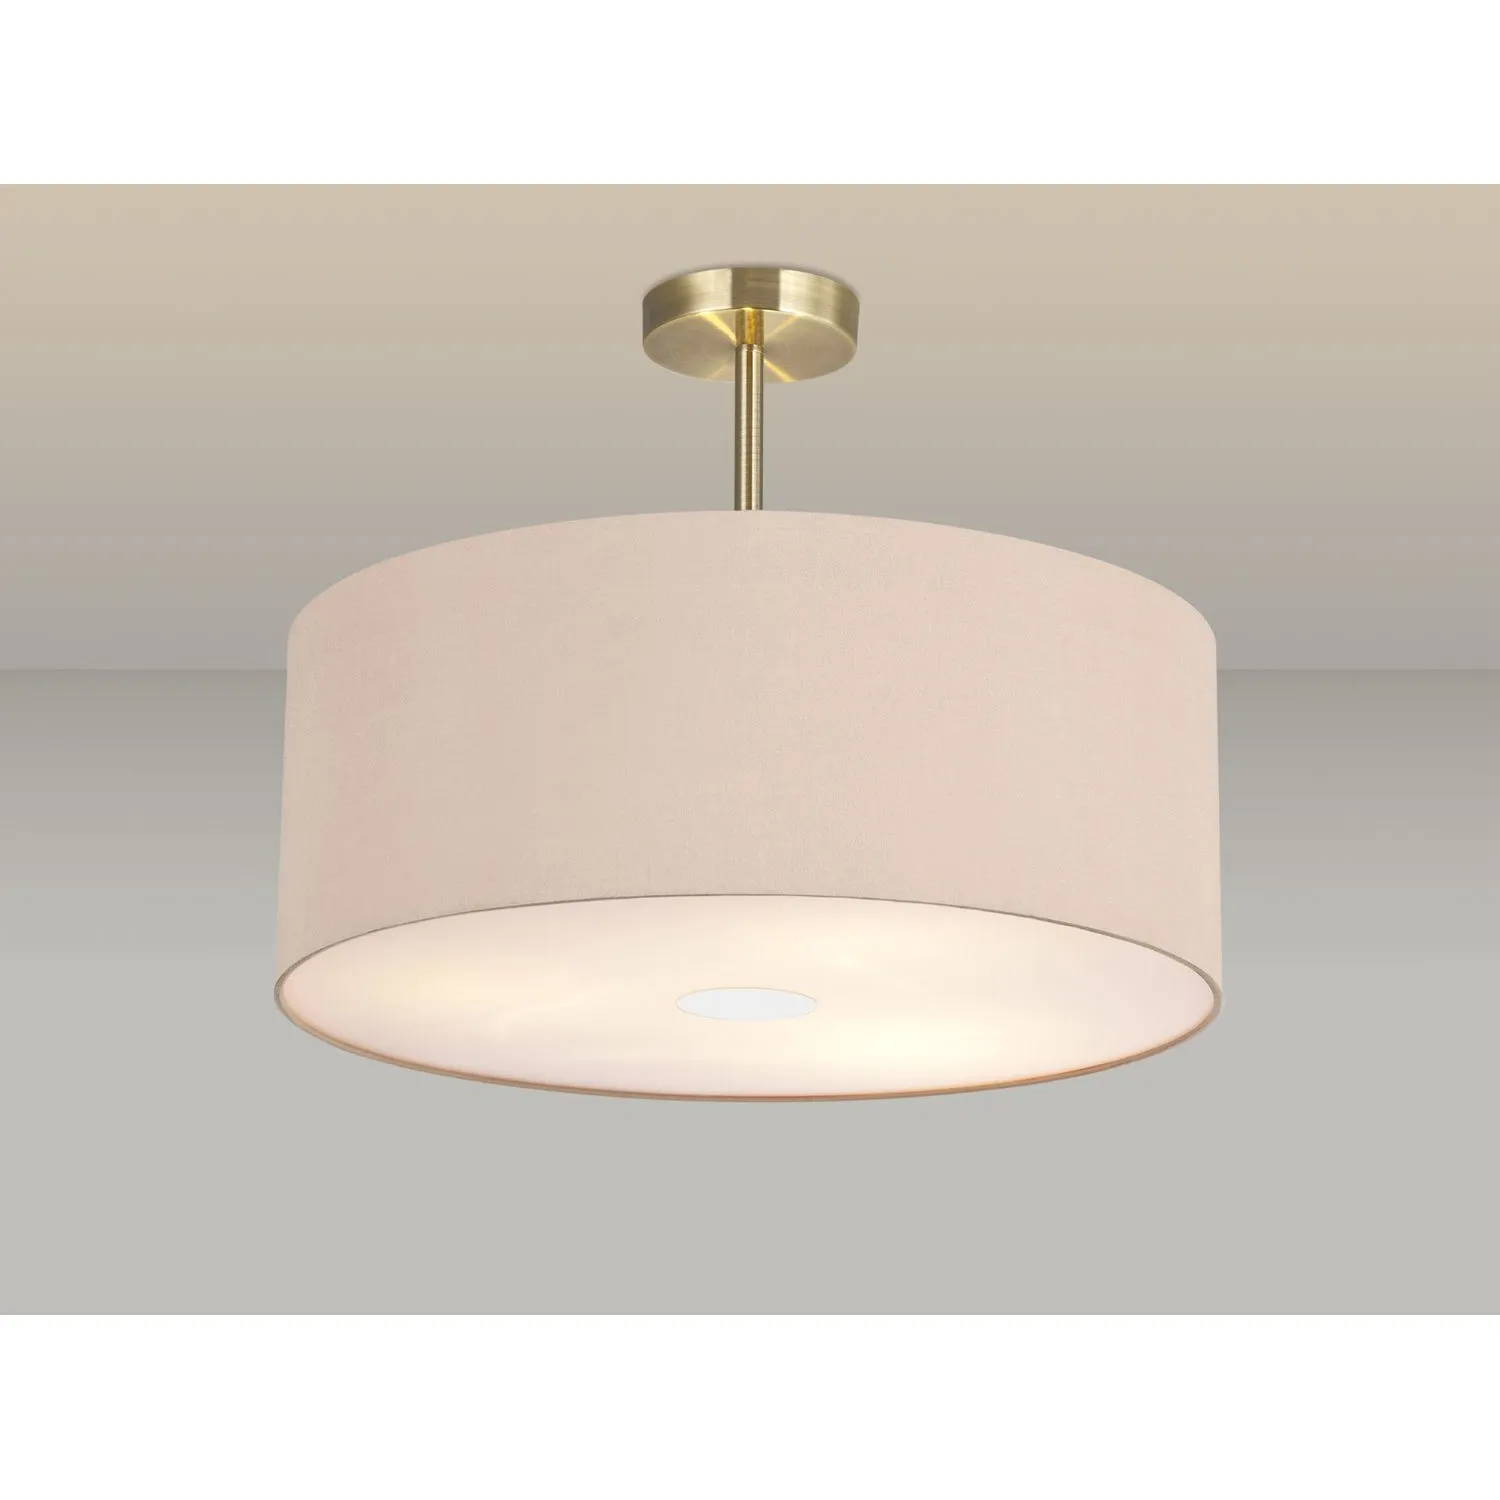 Baymont Antique Brass 3 Light E27 Semi Flush c w 500 Dual Faux Silk Fabric Shade, Antique Gold Ruby And 500mm Frosted AB Acrylic Diffuser